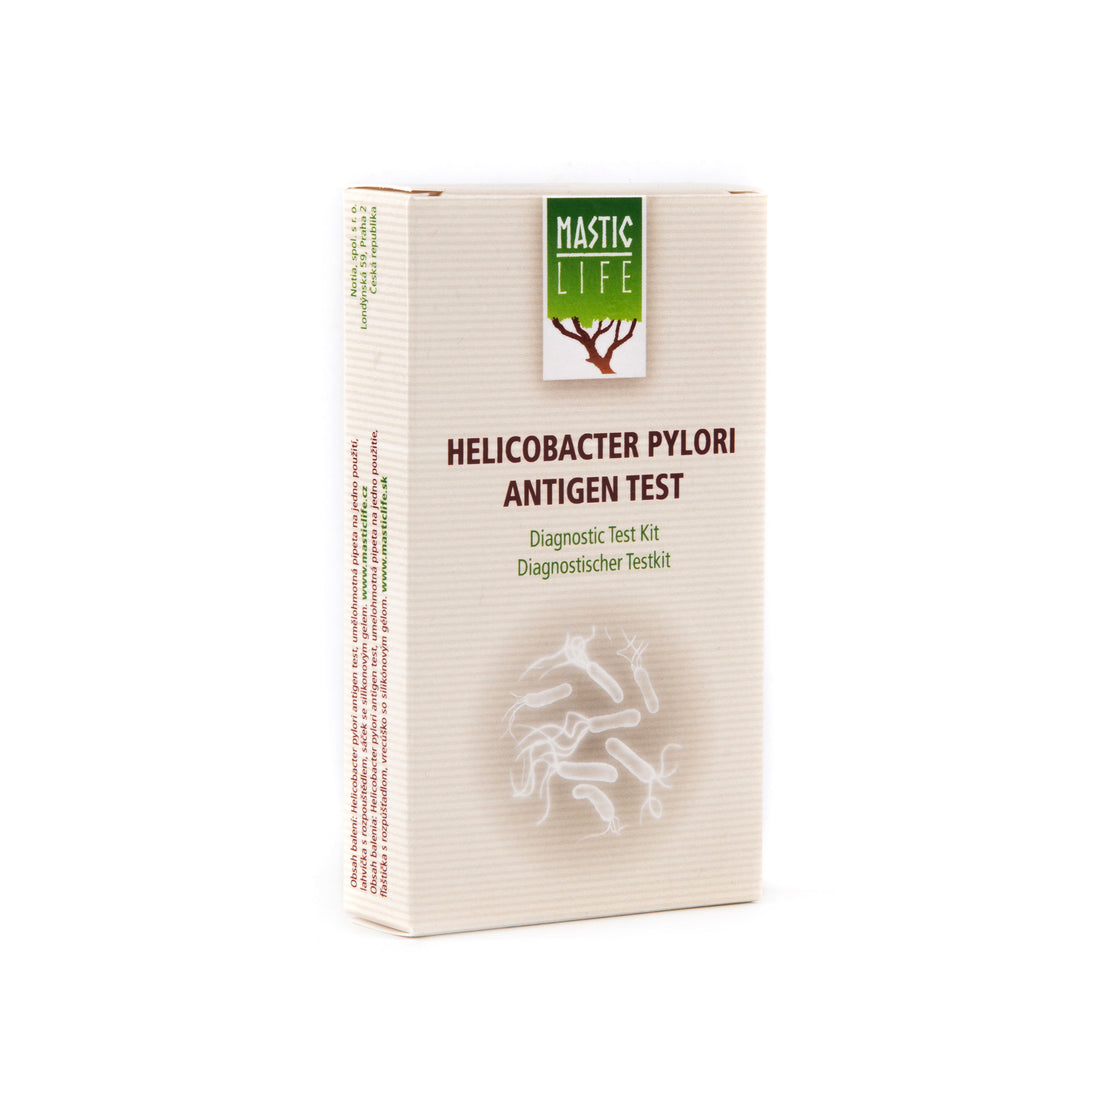 Helicobacter pylori Zuhause Test schnell